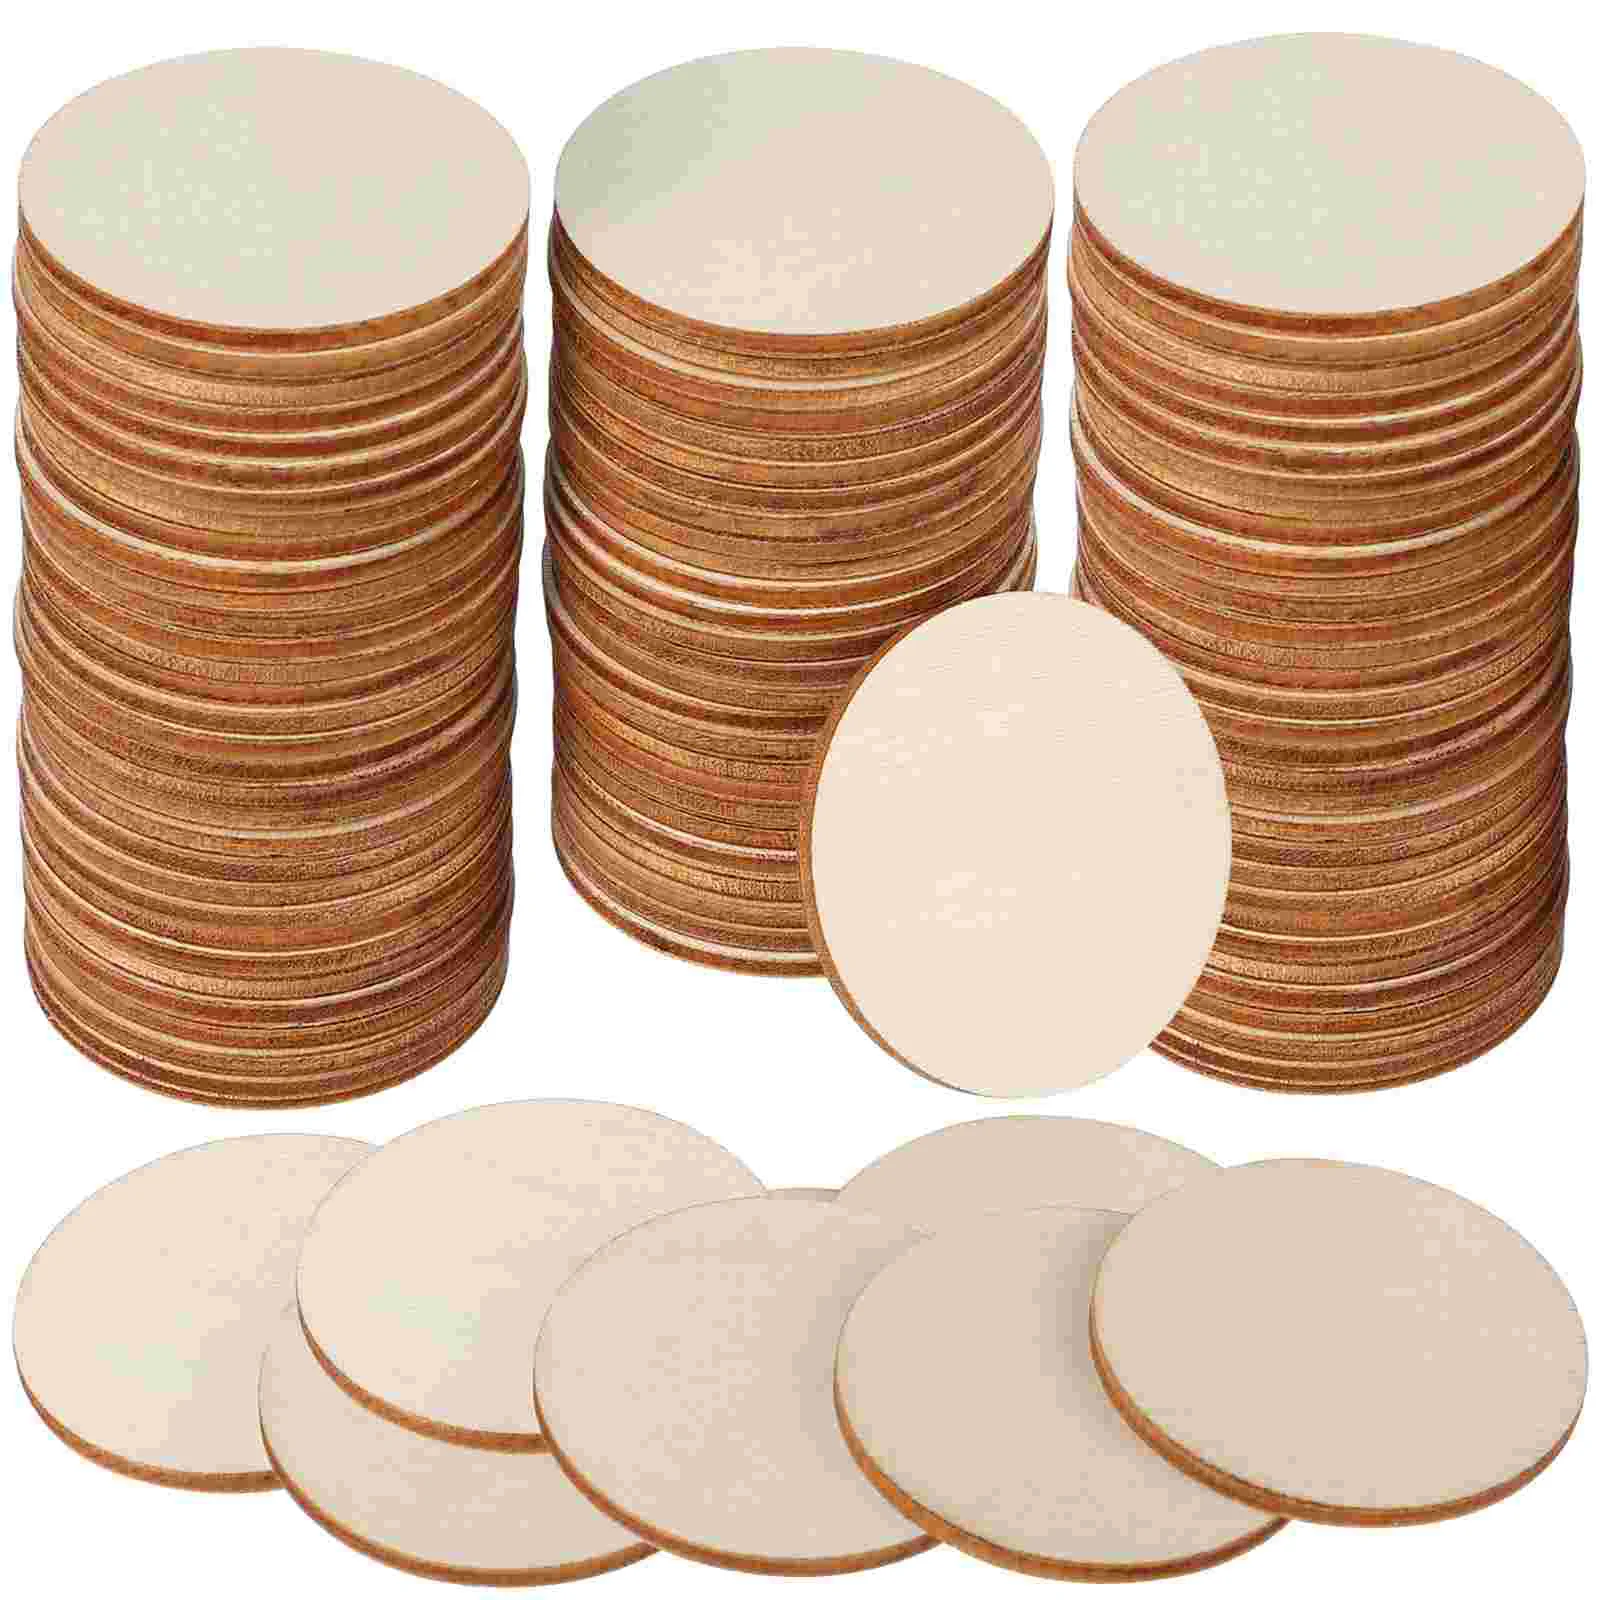 

GANAZONO Home Accessories 100Pcs Natural Wood Circles Slices Unfinished Cutout Round Wood Piece Wood Discs Blank Tags for DIY